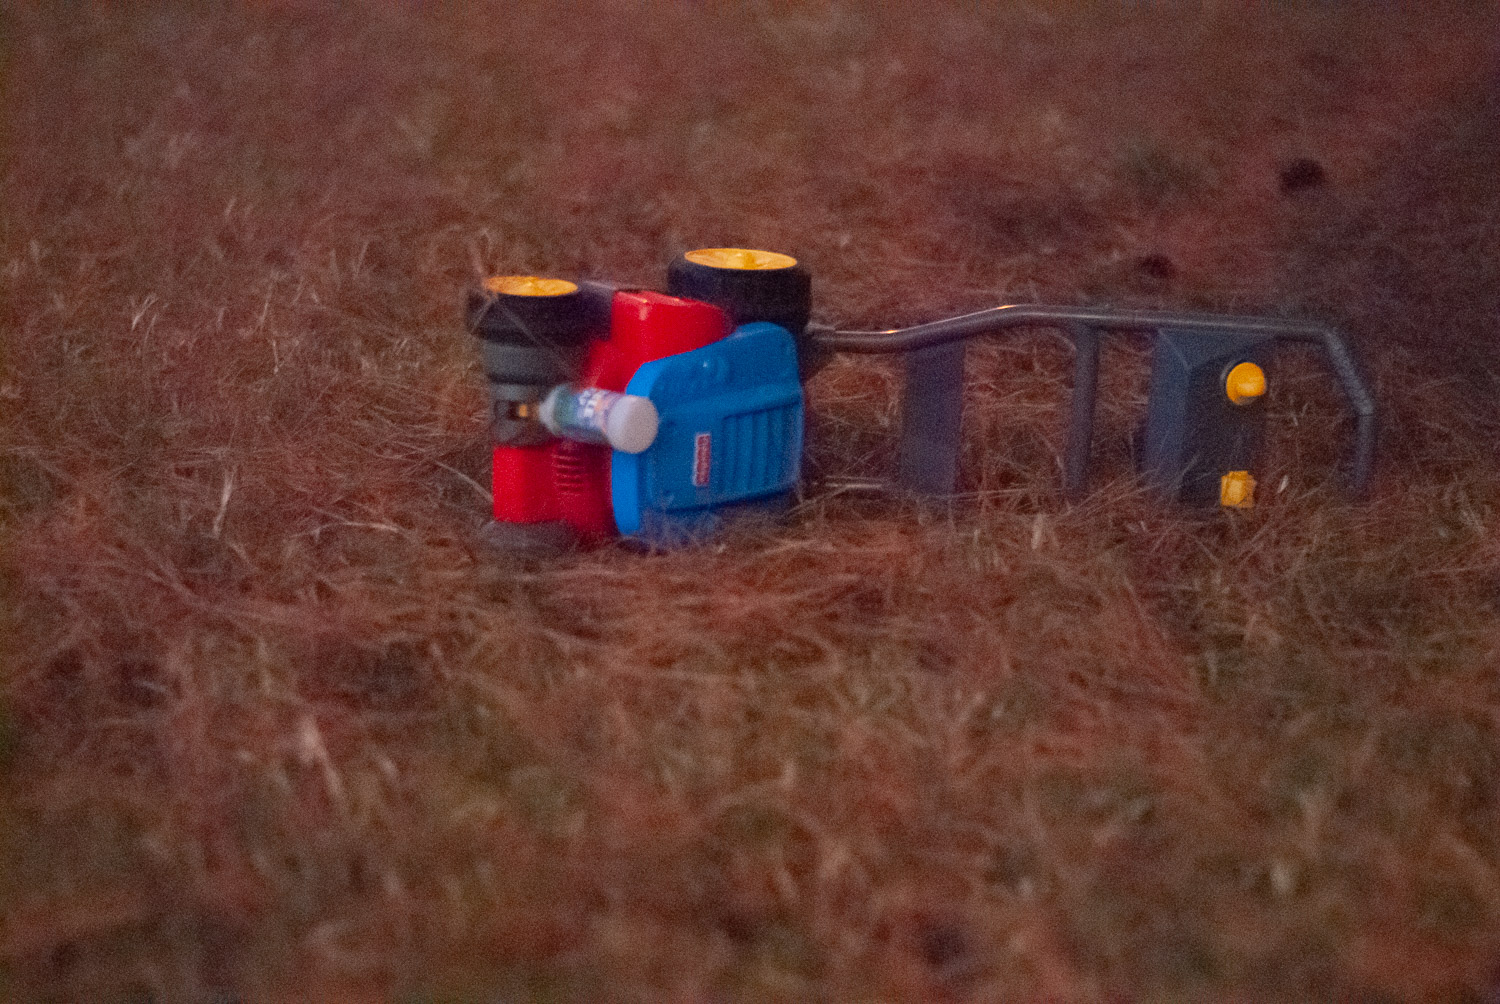 Lightroom's AI-Powered Denoise Feature: toy lawnmower on a bed of pine needles.